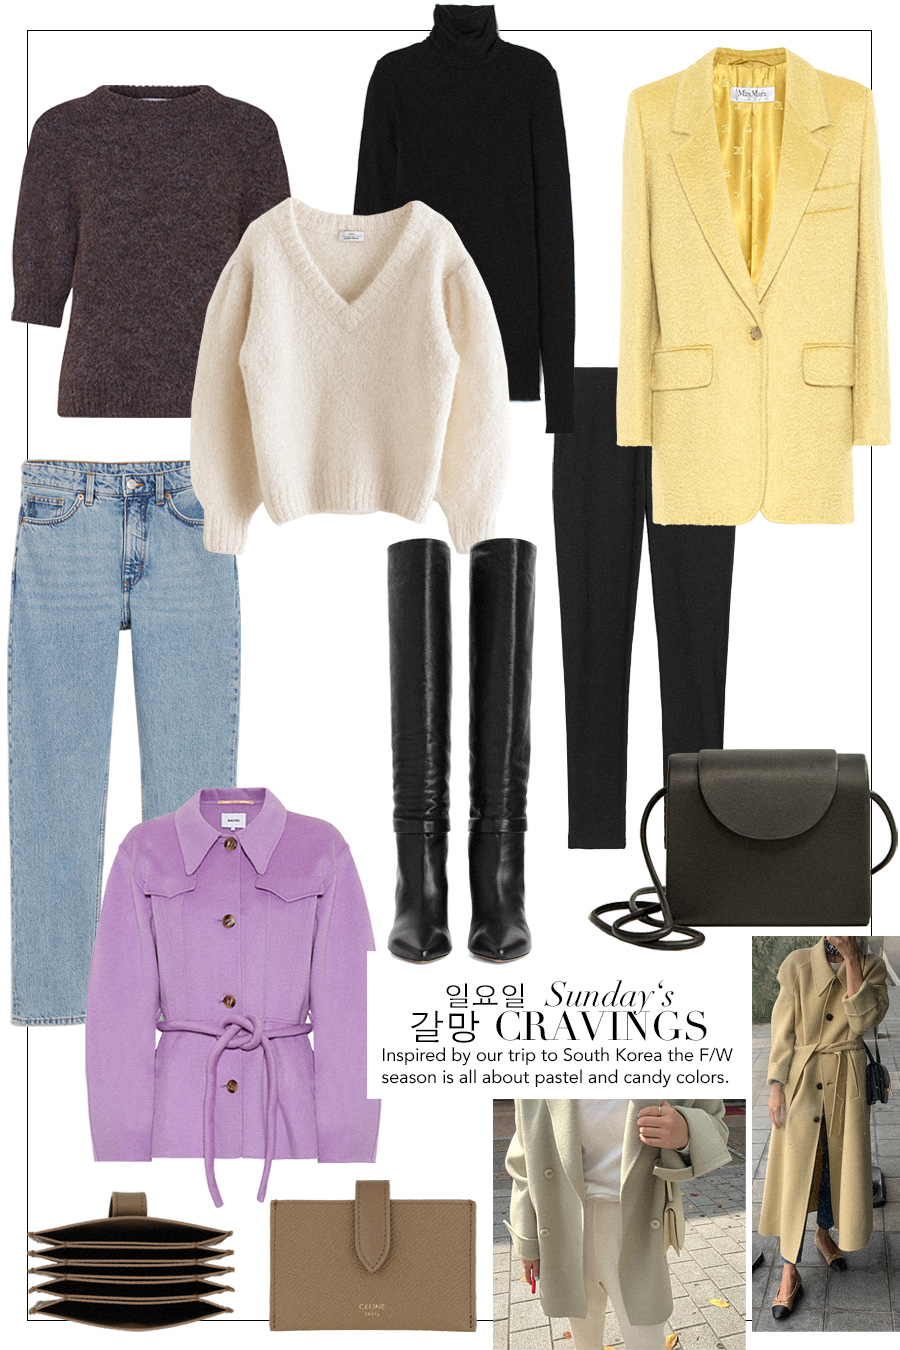 Sunday’s Cravings: Candy & Pastel colored Wool for Fall/Winter